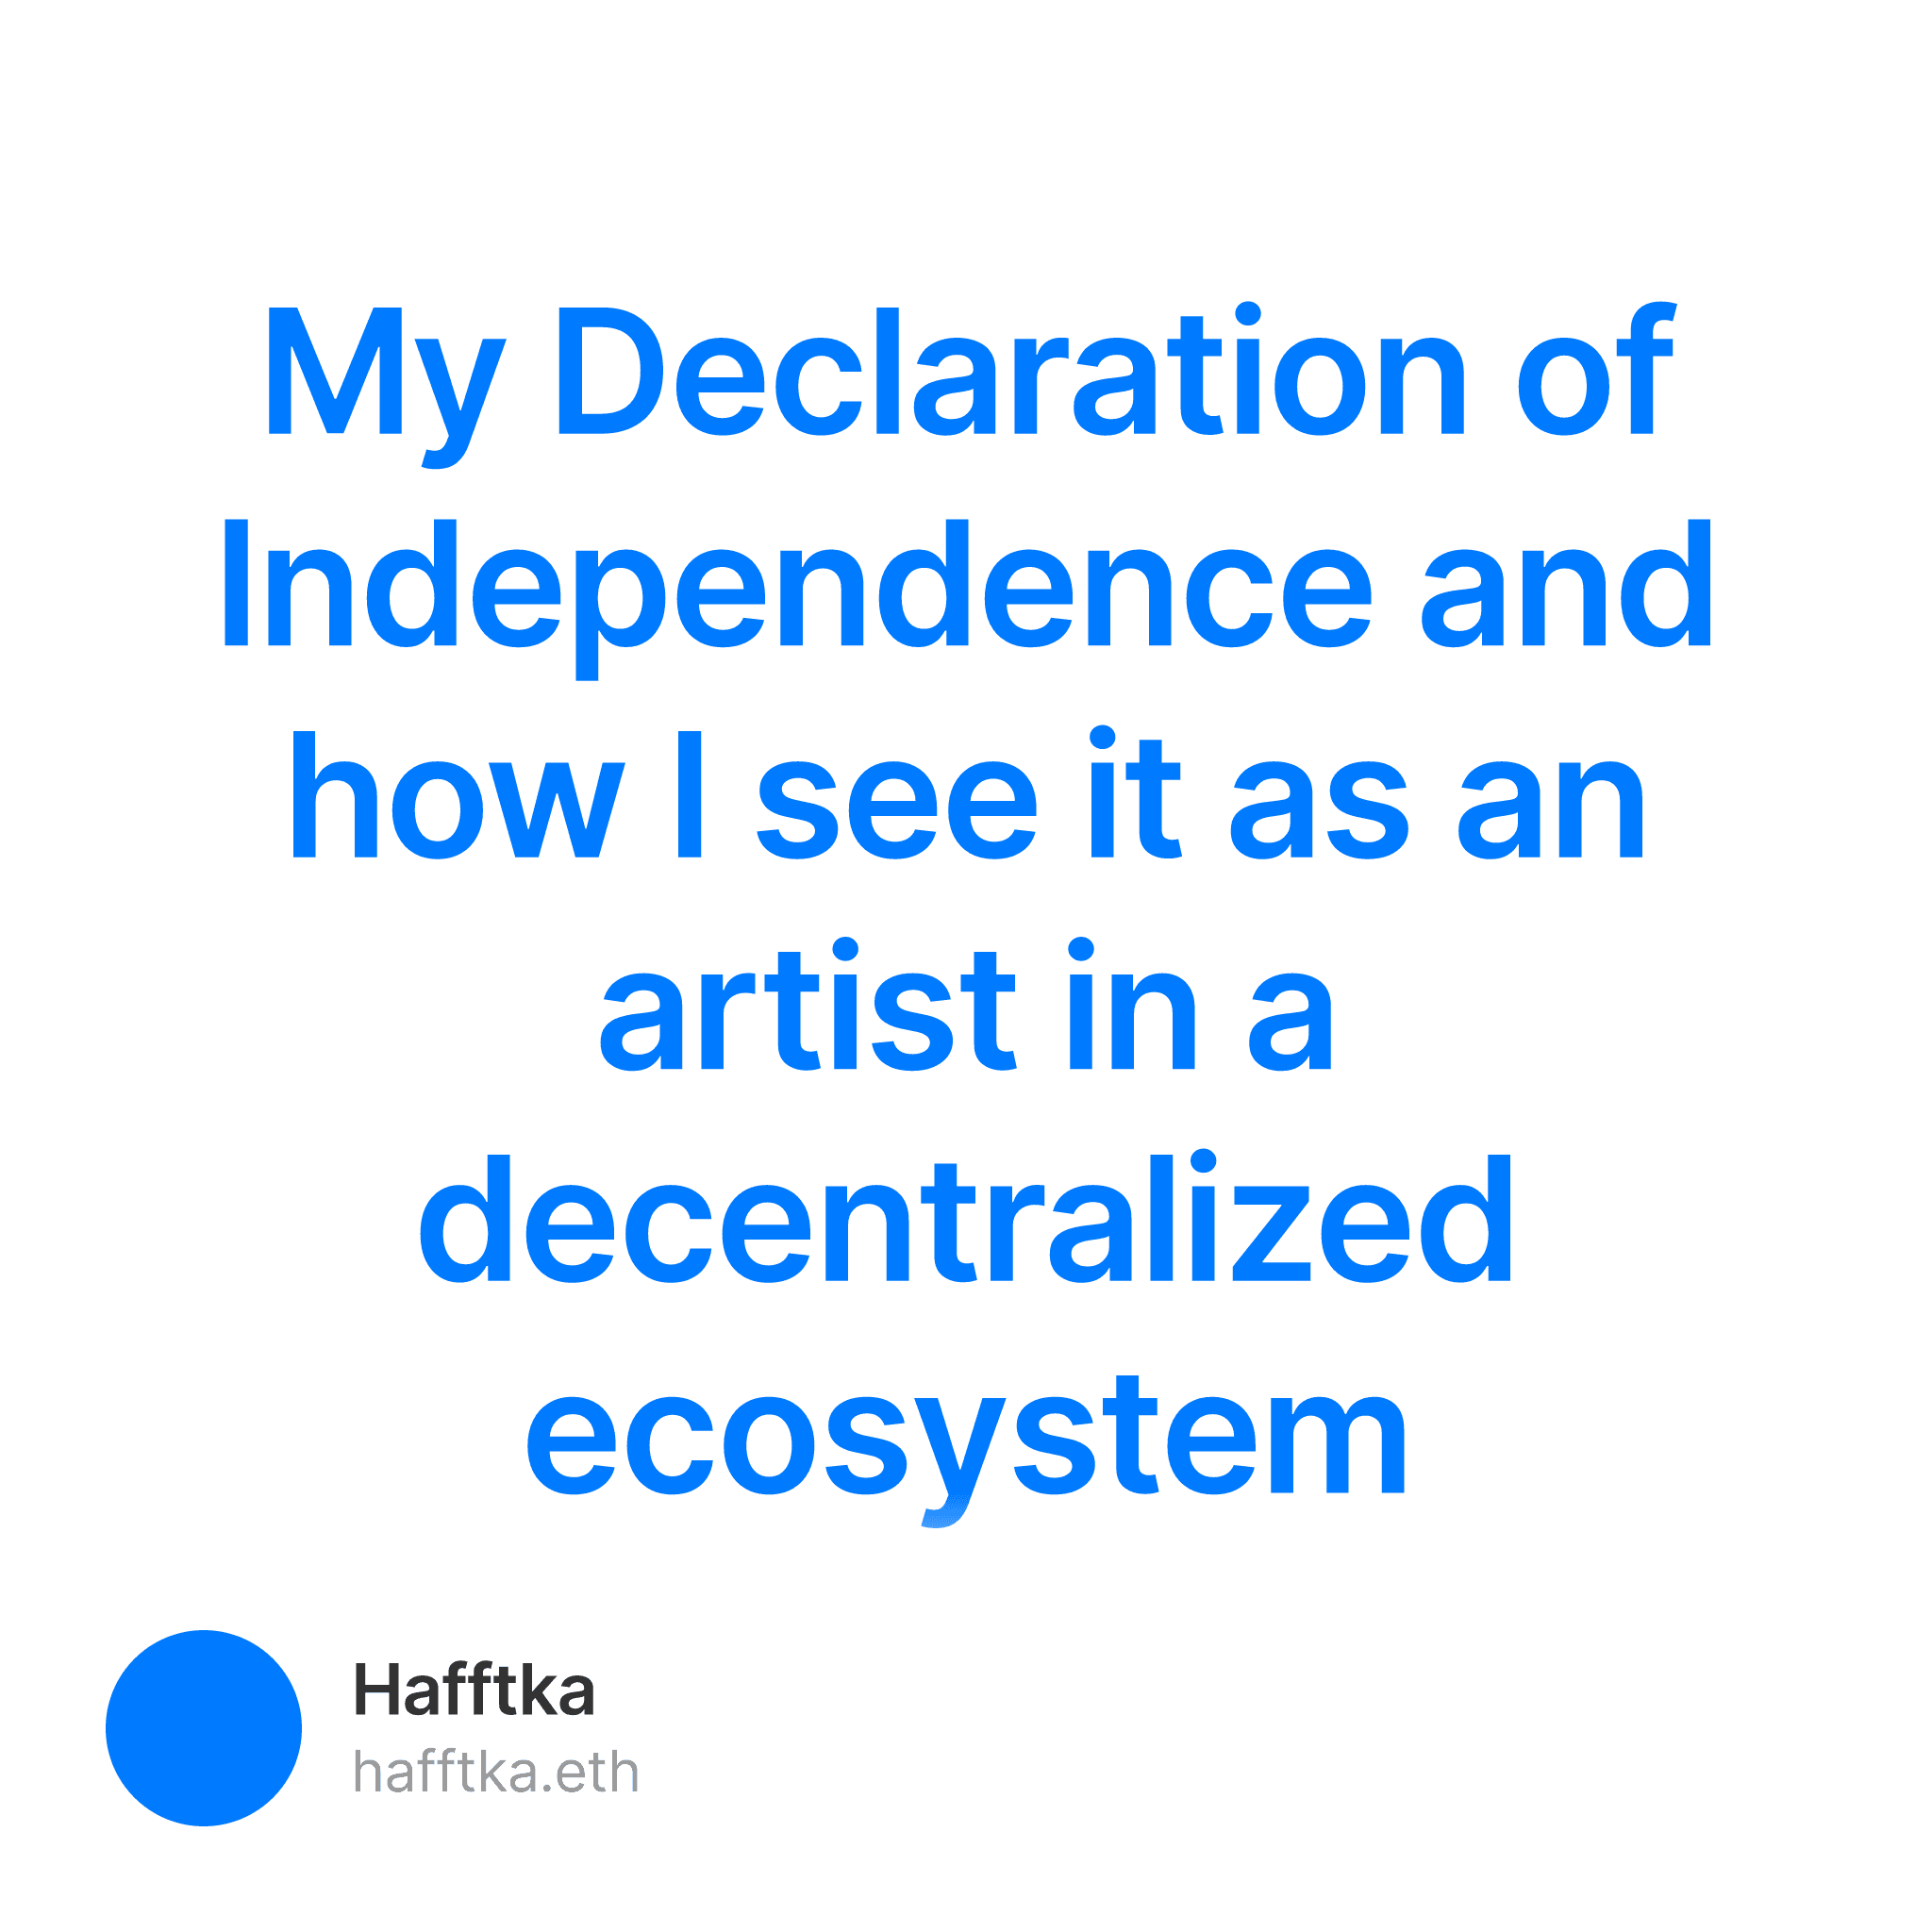 My Declaration of Independence and how I see it as an artist in a decentralized ecosystem  2/500